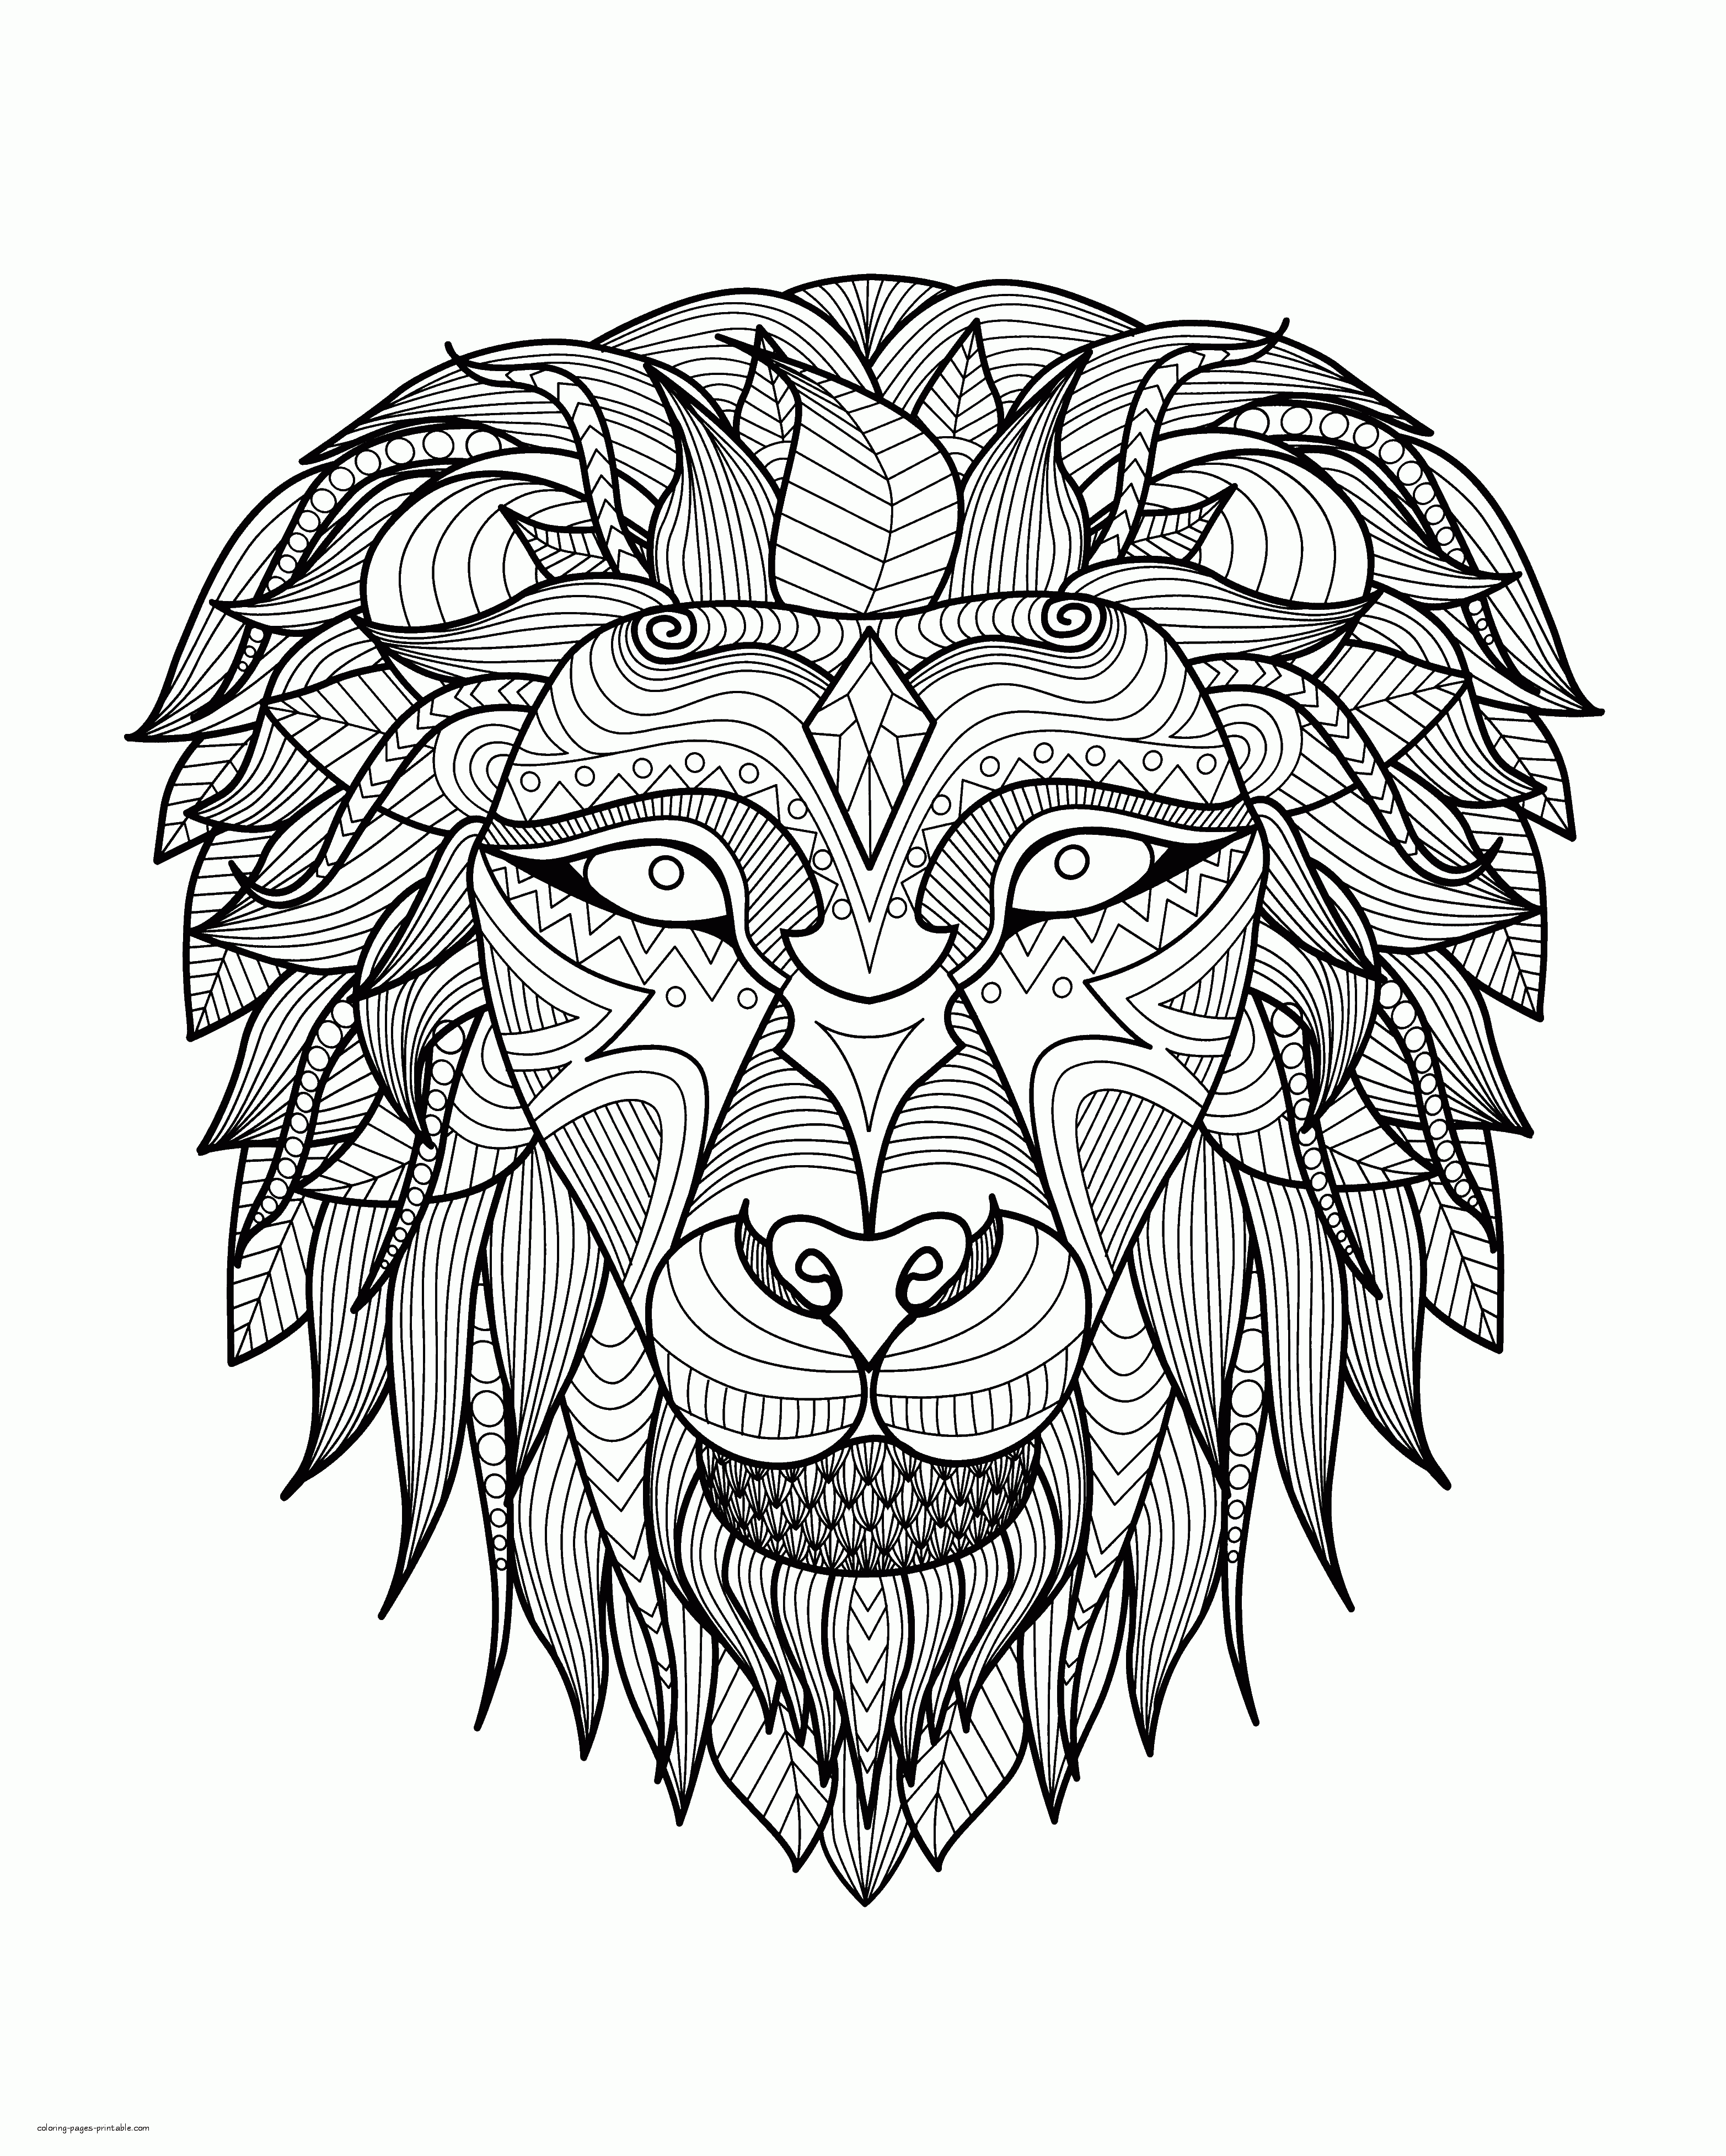 Hard Lion Coloring Page || COLORING-PAGES-PRINTABLE.COM